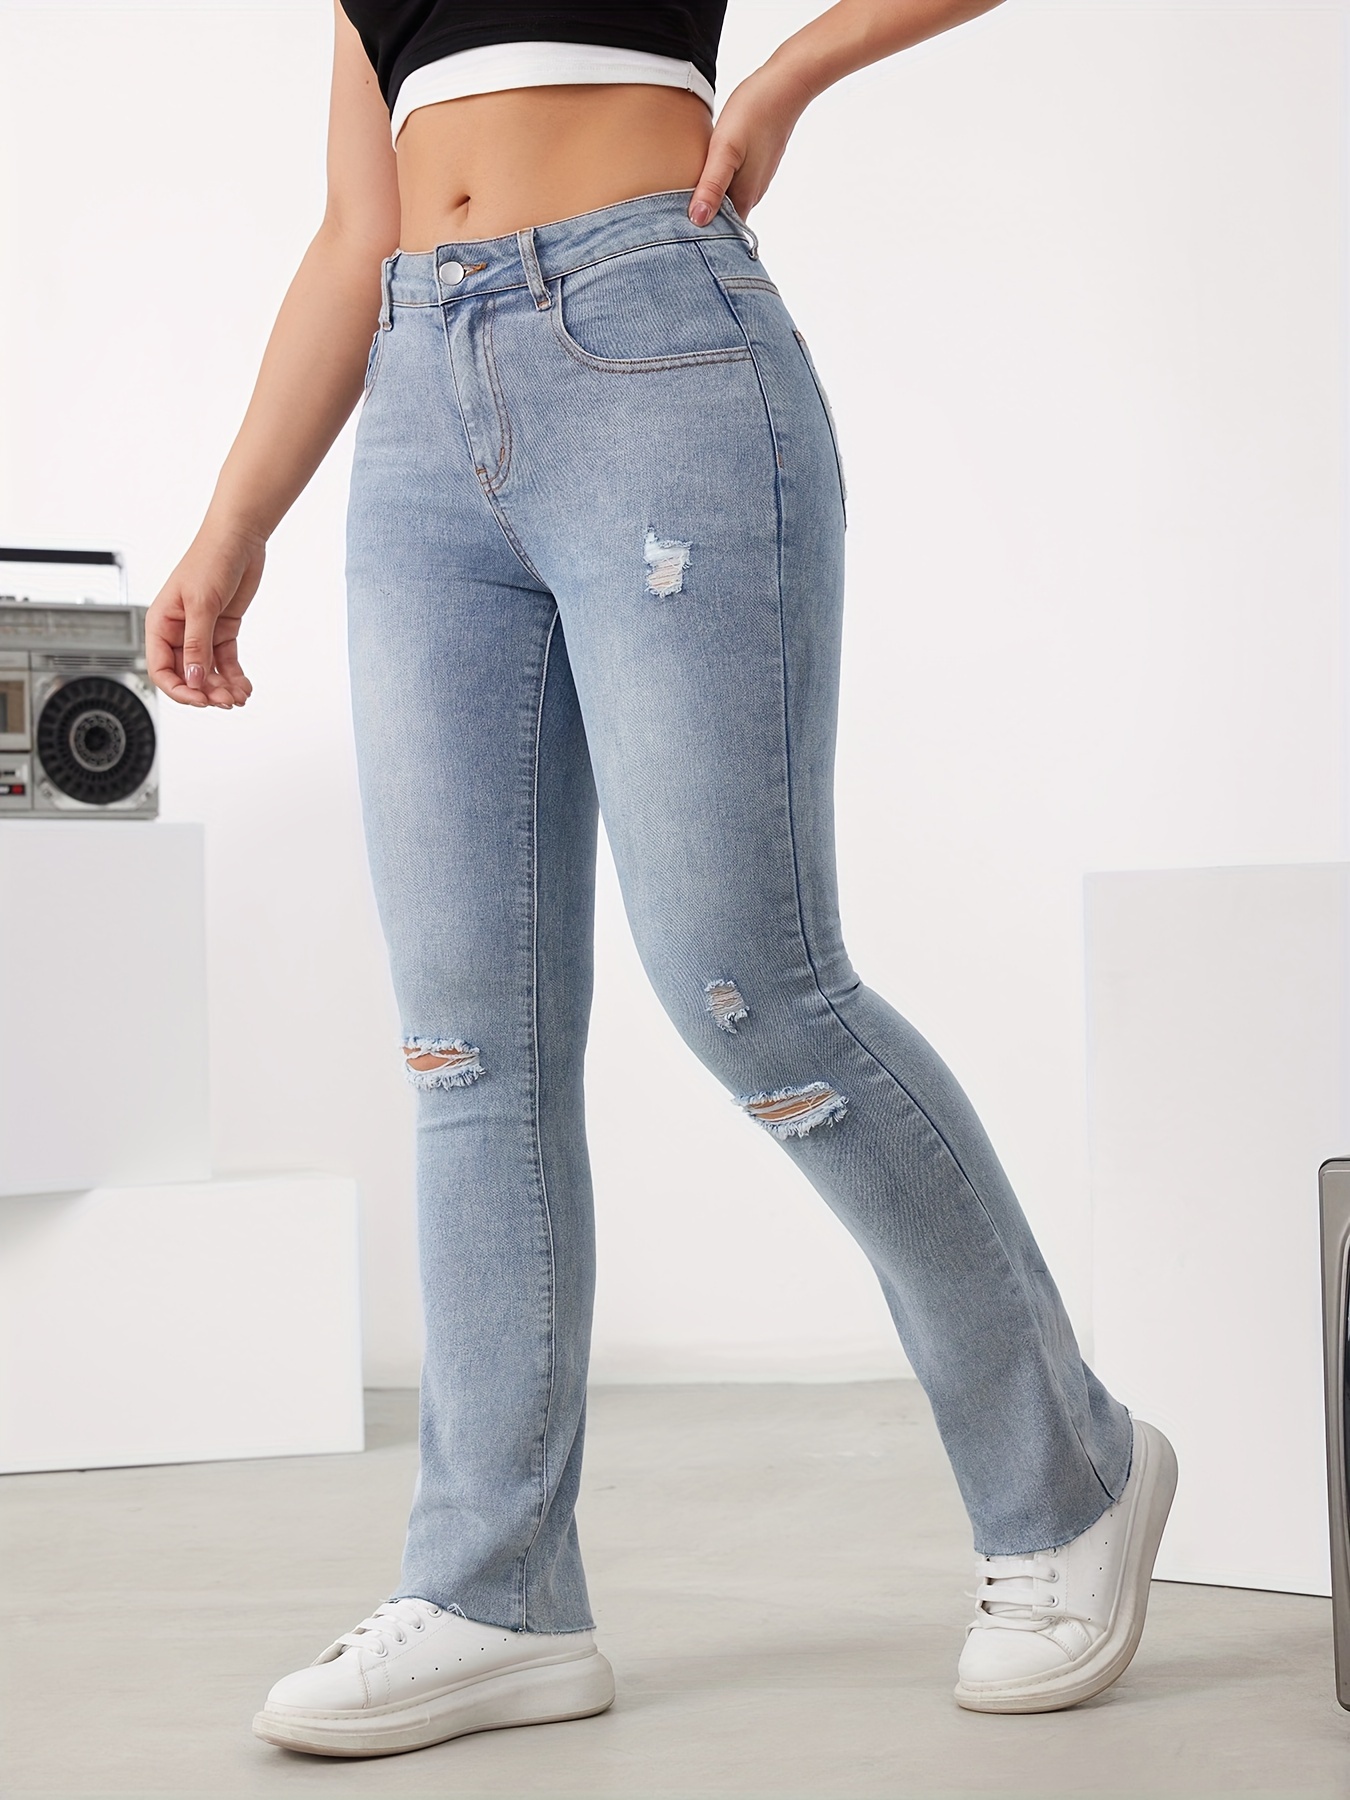 YWDJ Womens Jeans High Waisted Women Slim Washed Ripped Hole